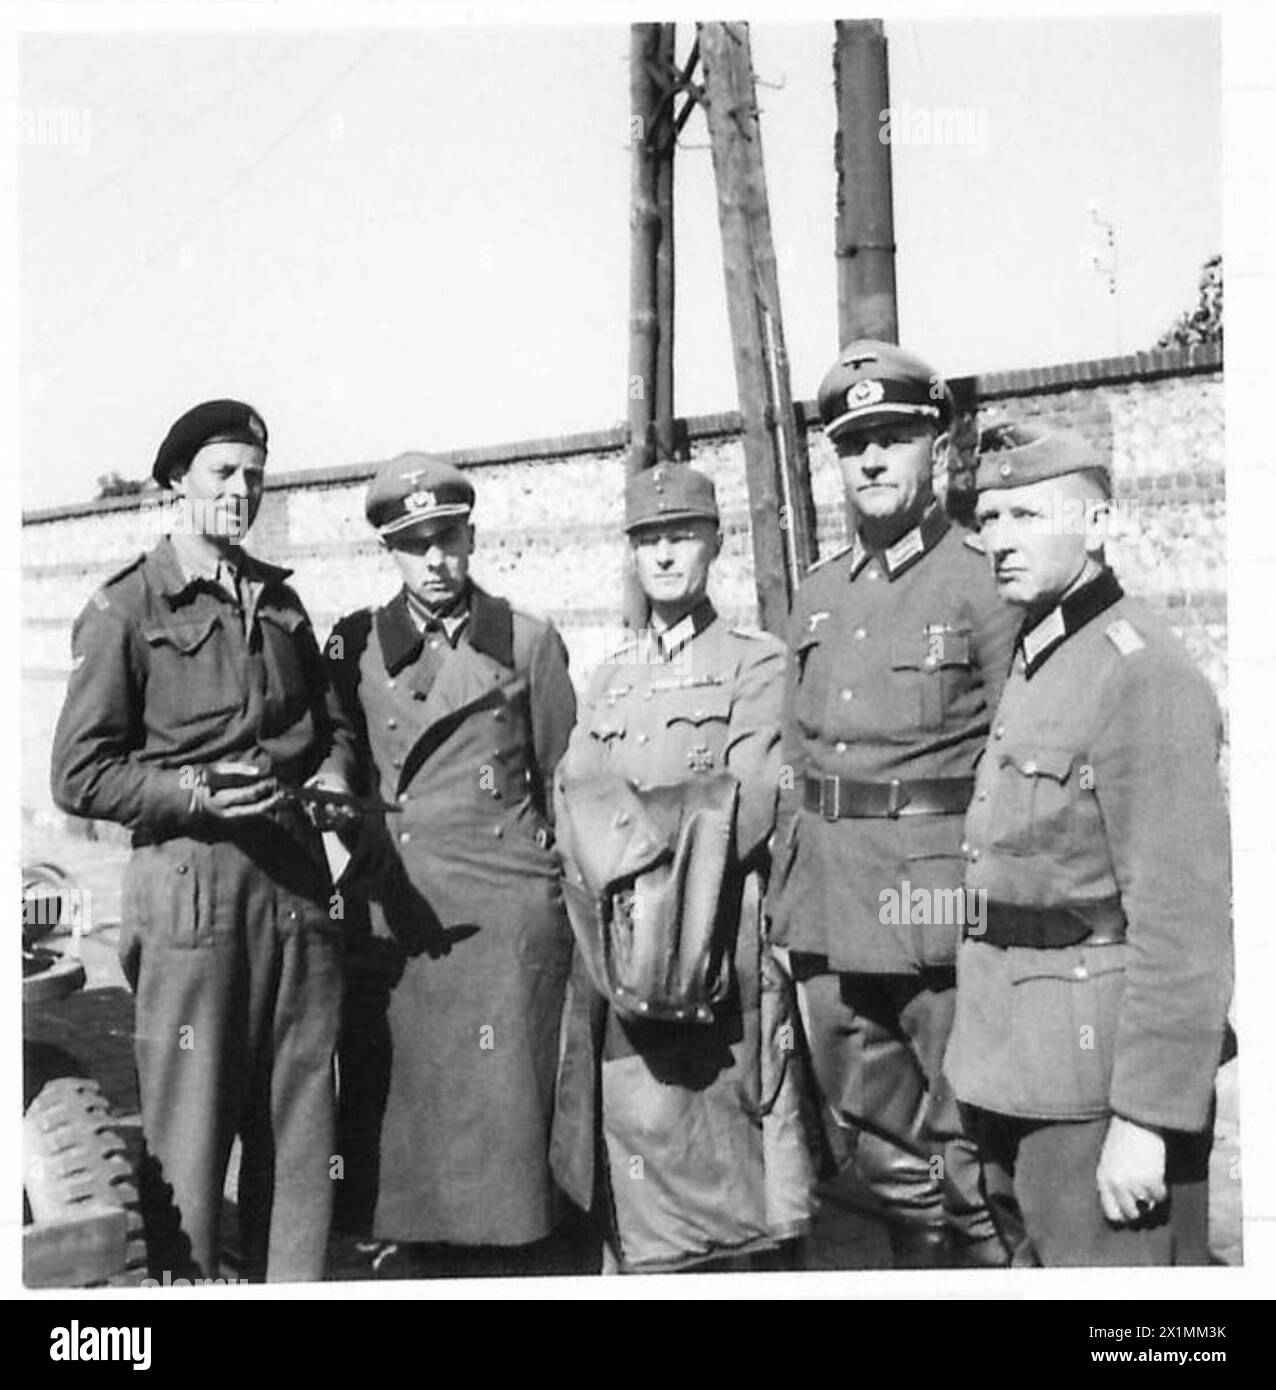 BRITISH TROOPS ENTER LE HAVRE - Major Howard-Jones of a battalion of the Royal Tank Regiment with five German officers he took prisoner at Fort Le Havre. They are - left to right :- Col. Steinhart, Col. Ludwig, Col. Kynzoriz, Capt. Jakob Heberle, Capt. Paul Berkenhoff, British Army, 21st Army Group Stock Photo